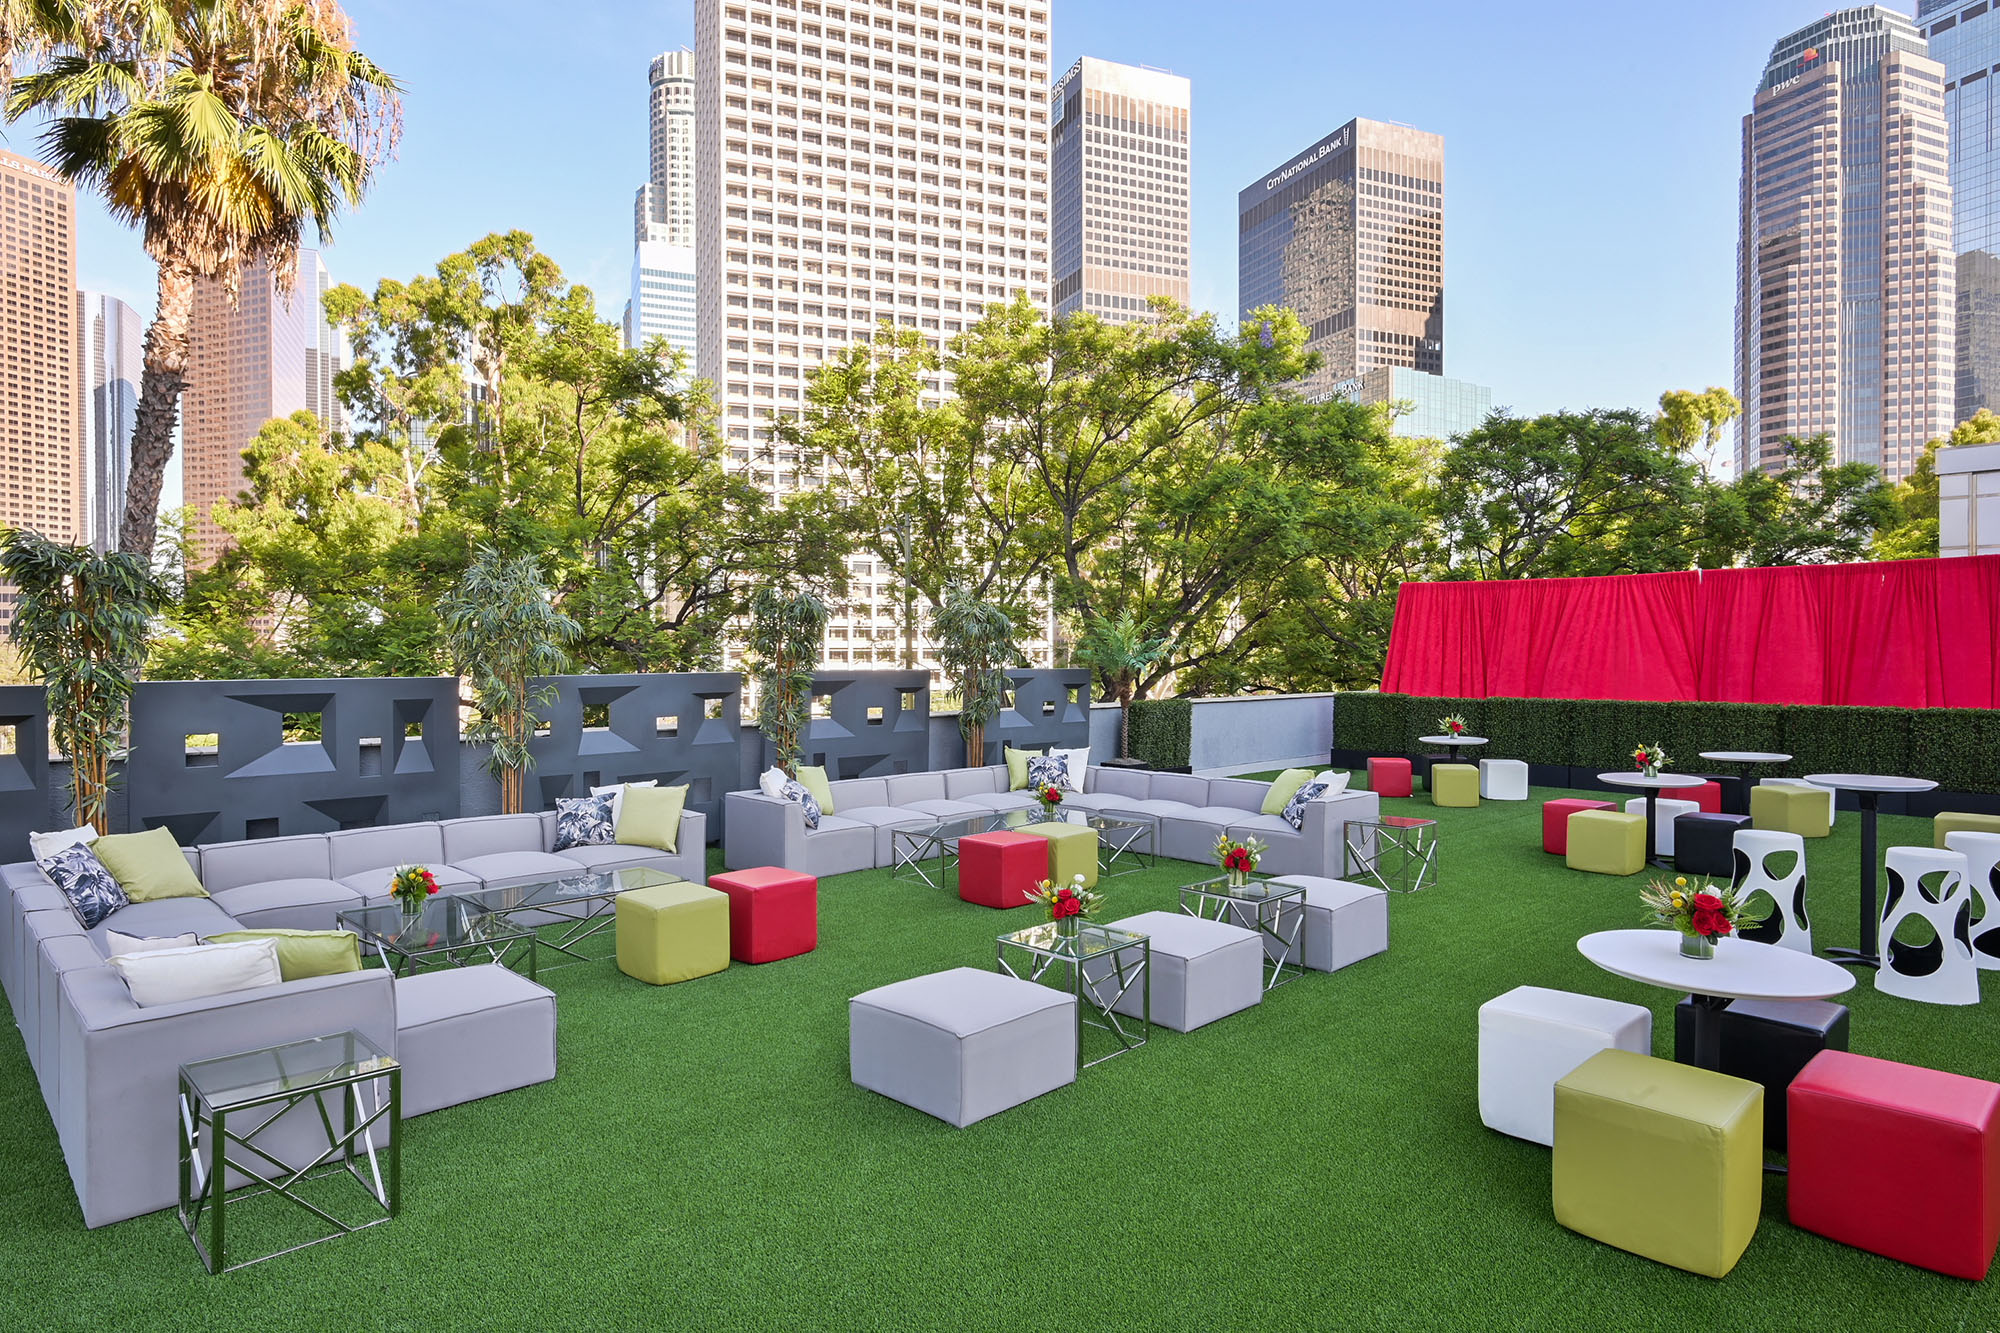 outdoor event with gray soft seating and red and green accents